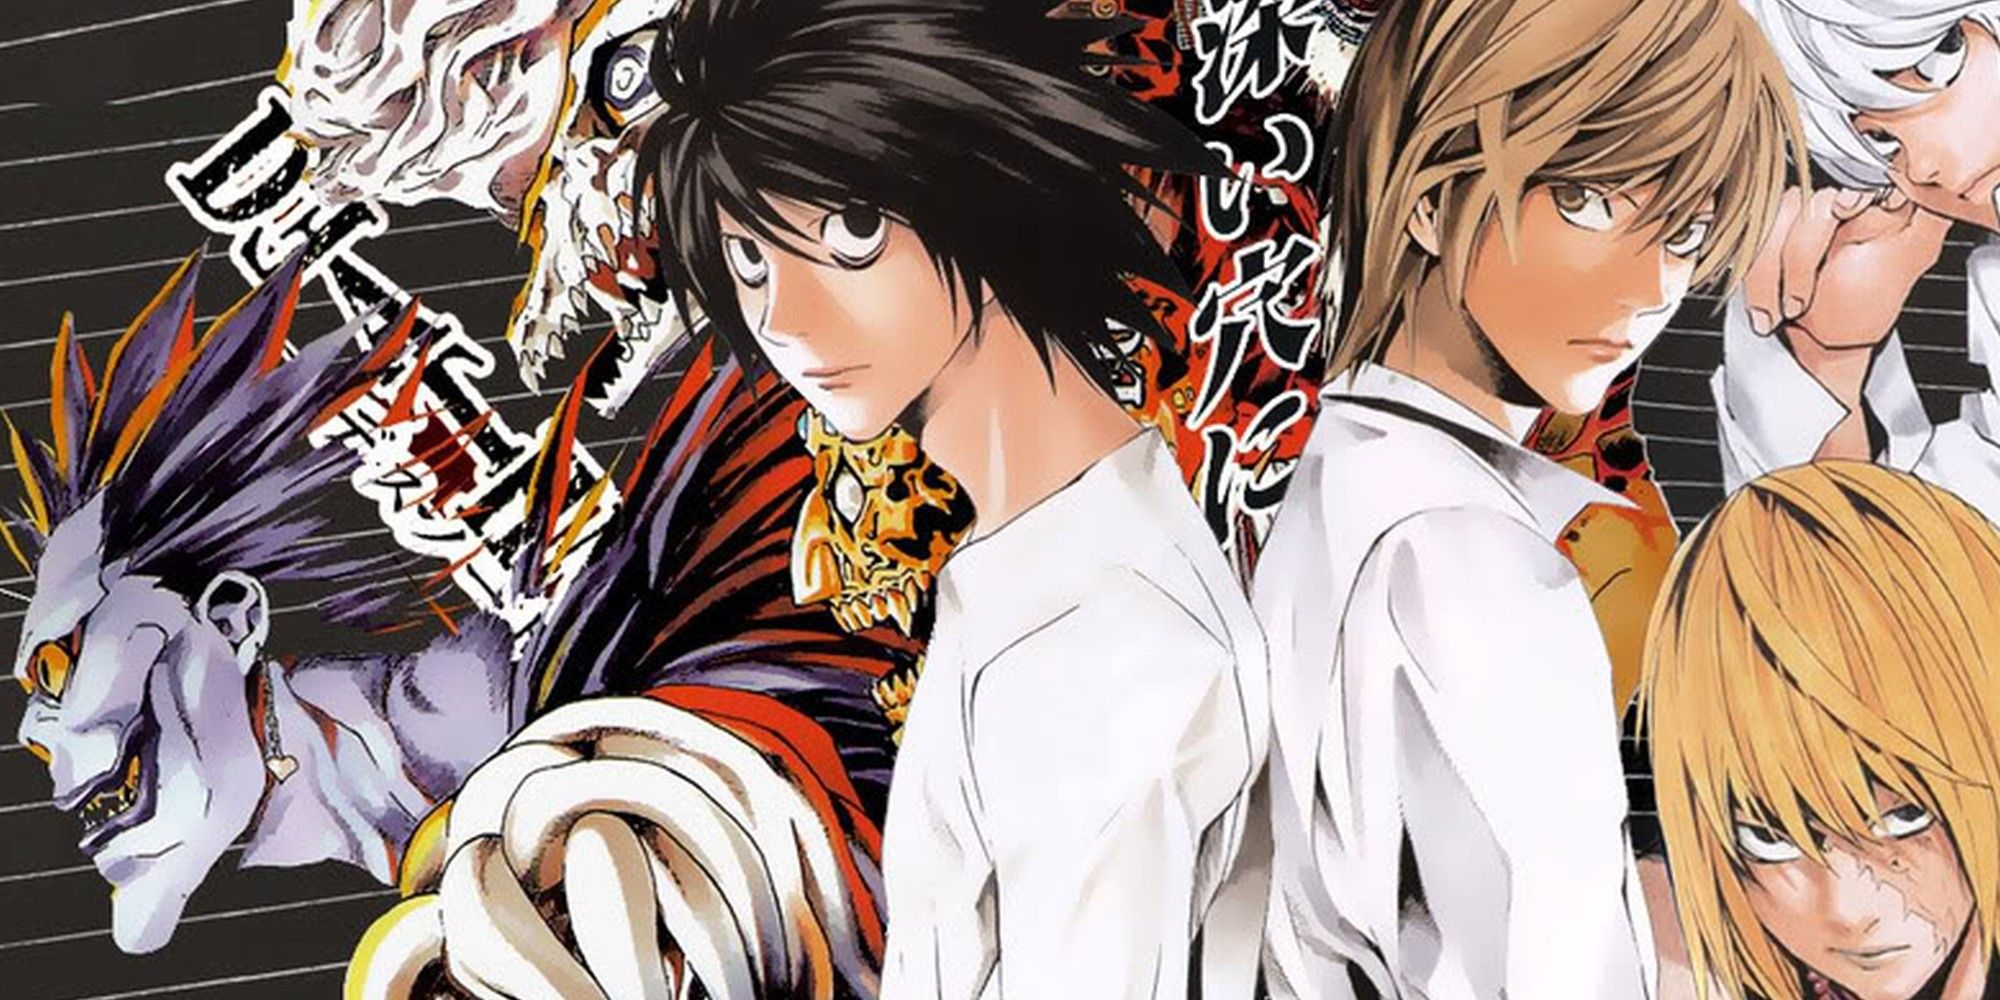 L and Light Yagumi back to back in front of a collage of Death Note characters.